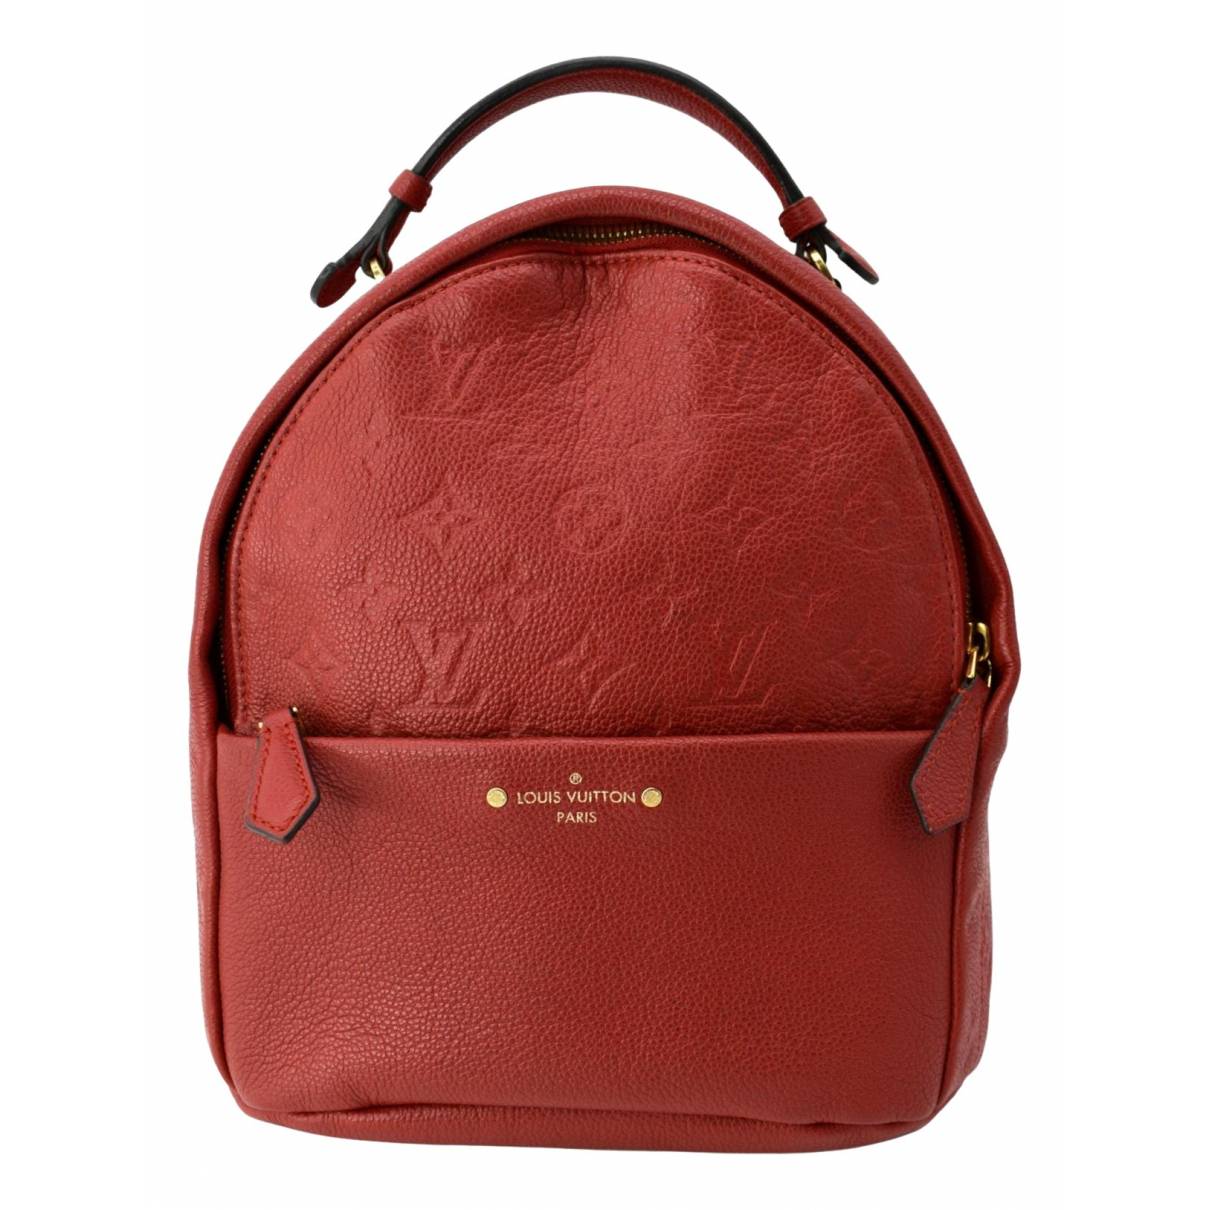 Louis Vuitton Sorbonne Backpack Reviewed